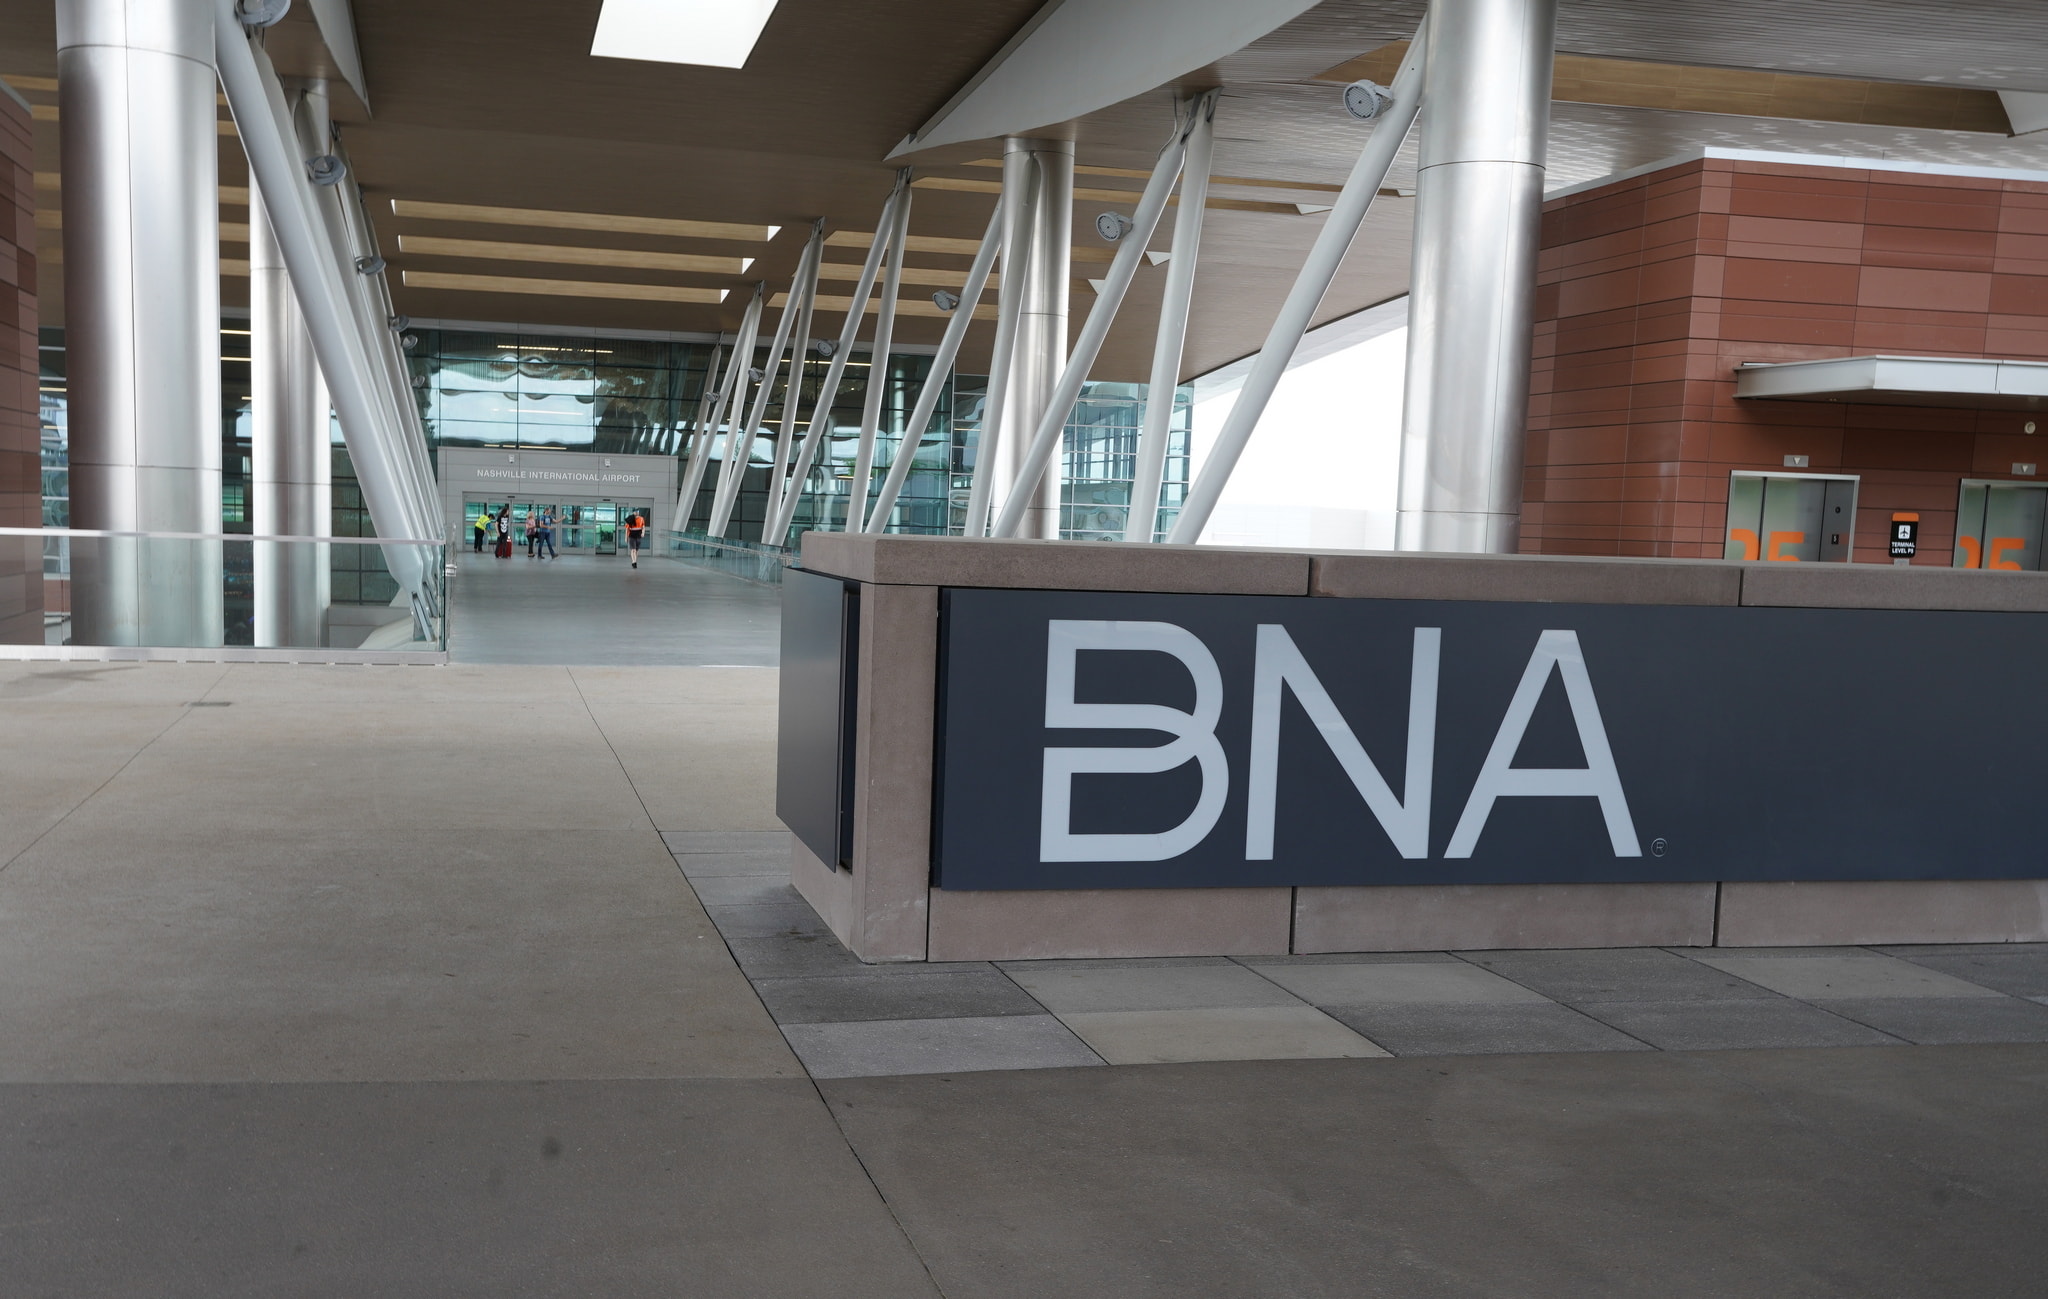 outside Nashville Airport with BNA sign end airport entrance.